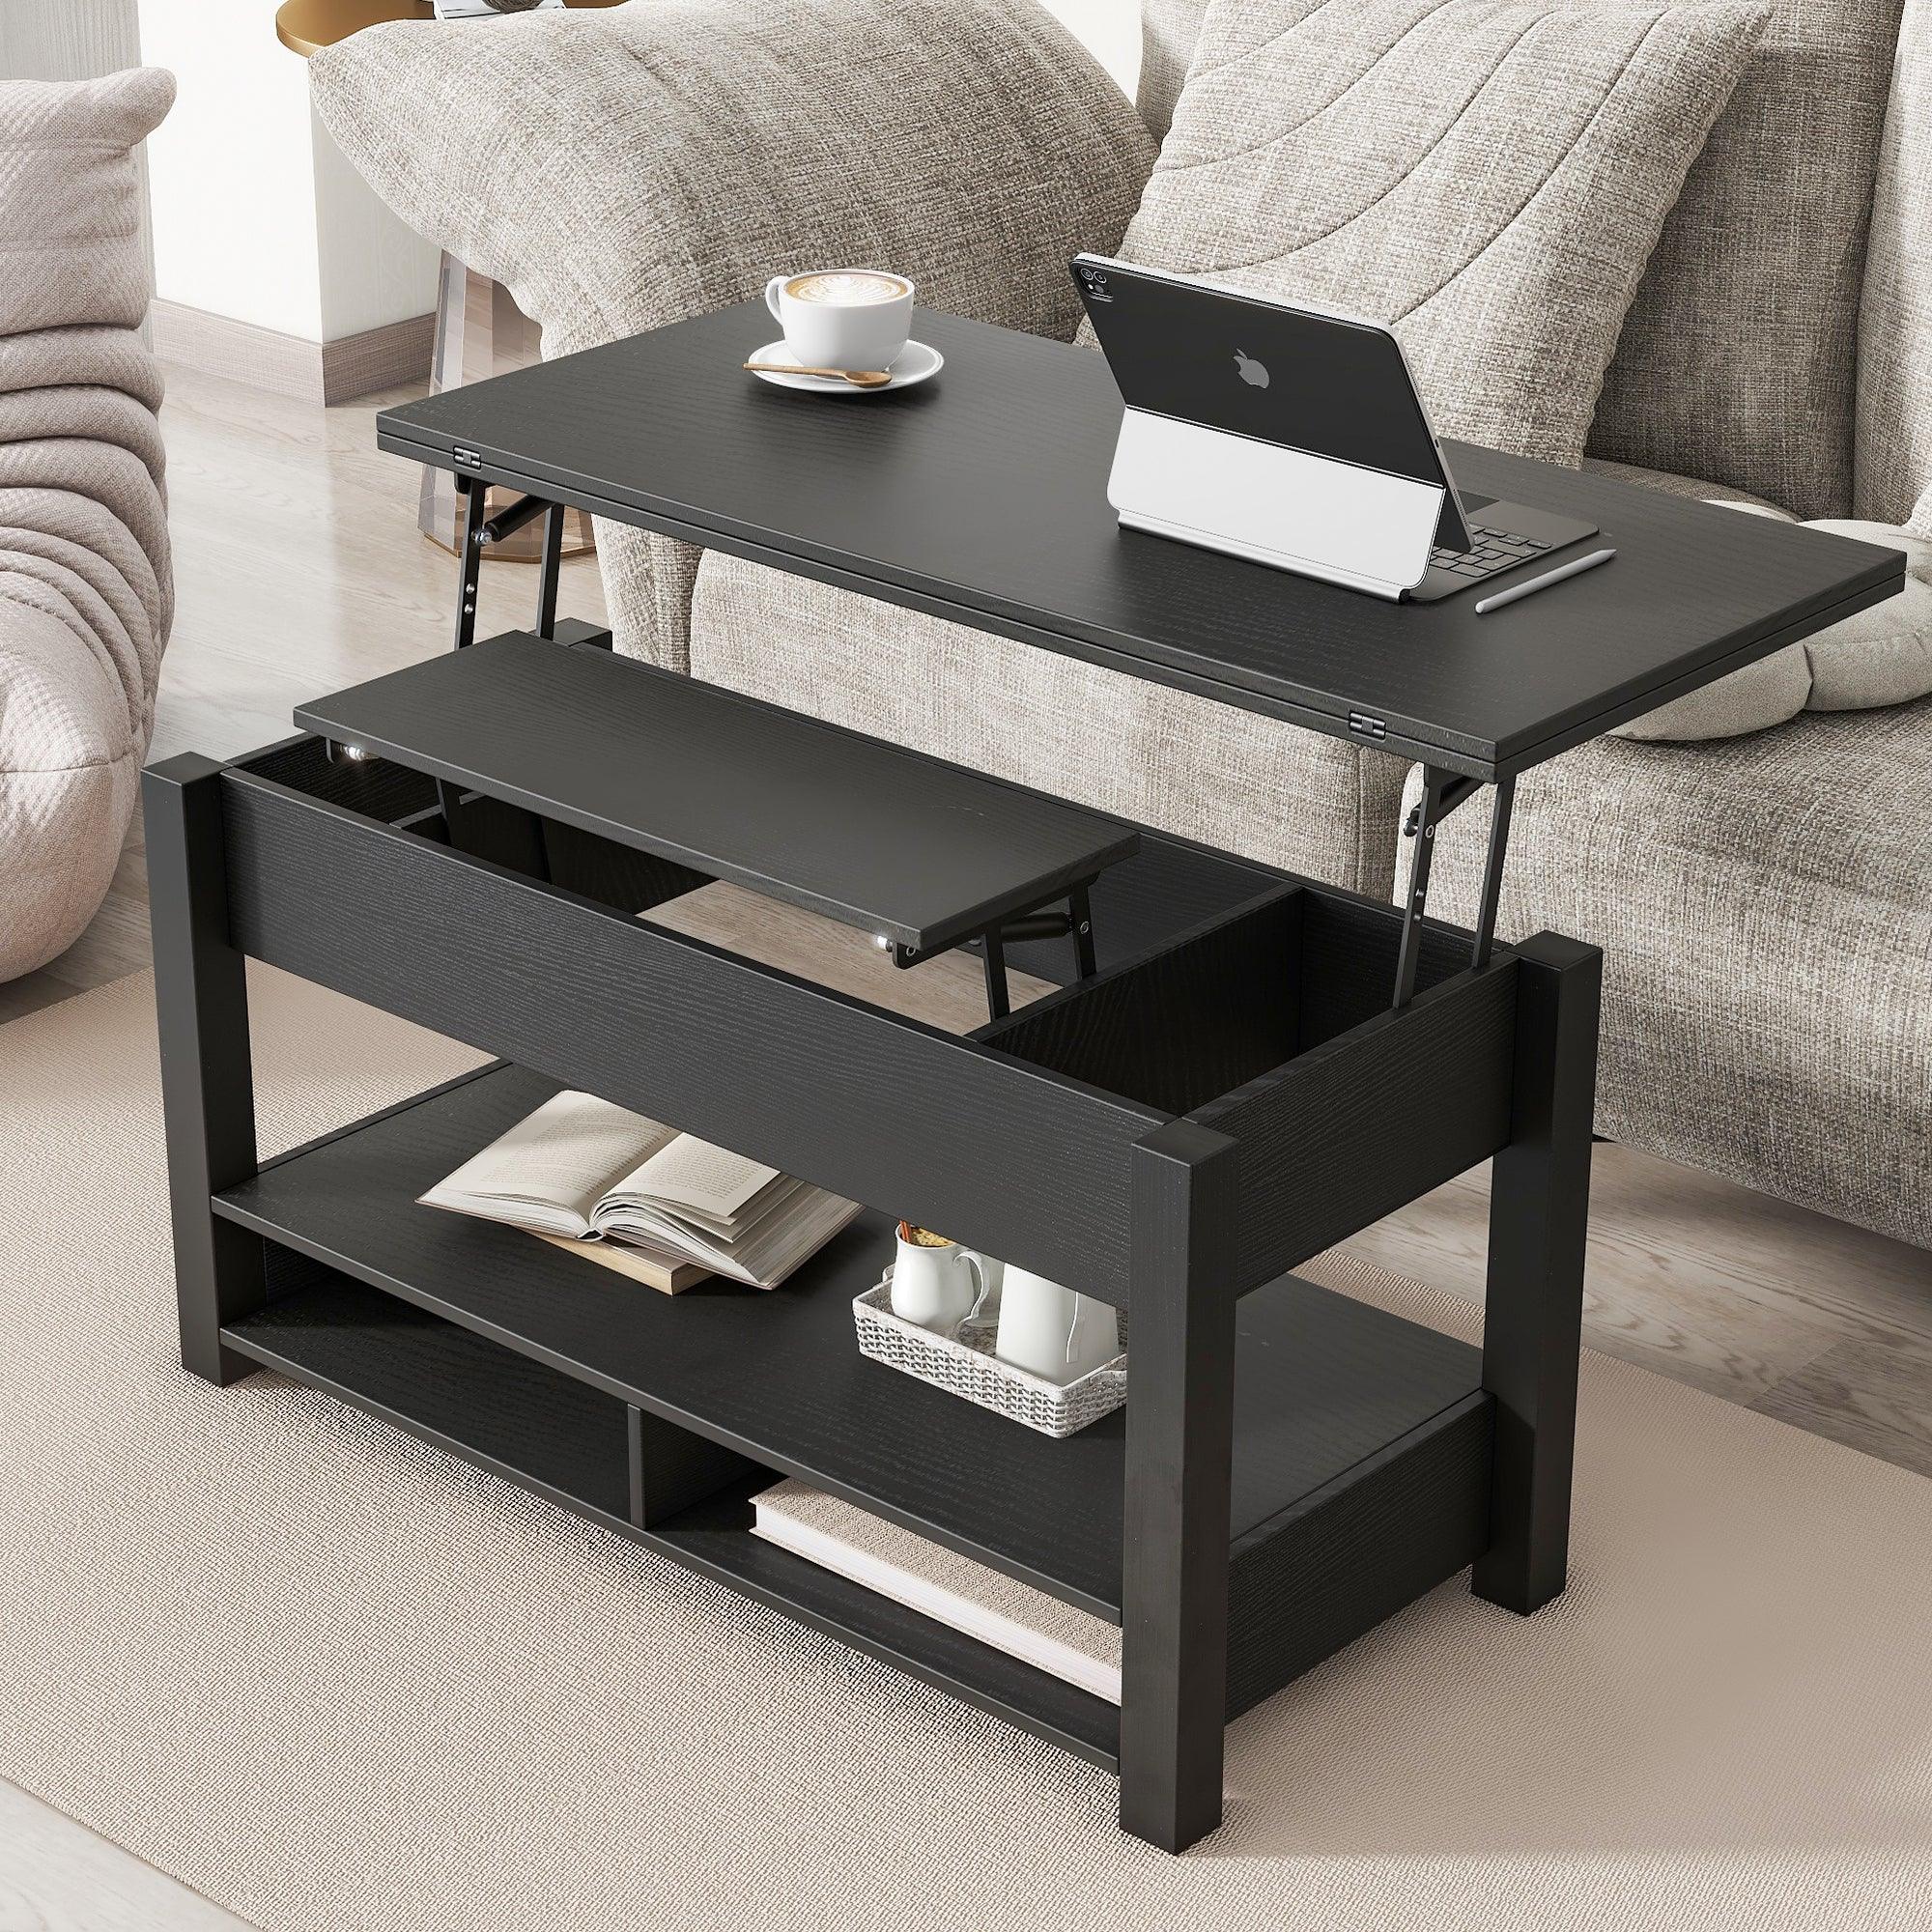 🆓🚛 Lift Top Coffee Table, Multi-Functional Coffee Table With Open Shelves, Modern Lift Tabletop Dining Table for Living Room, Home Office, Black